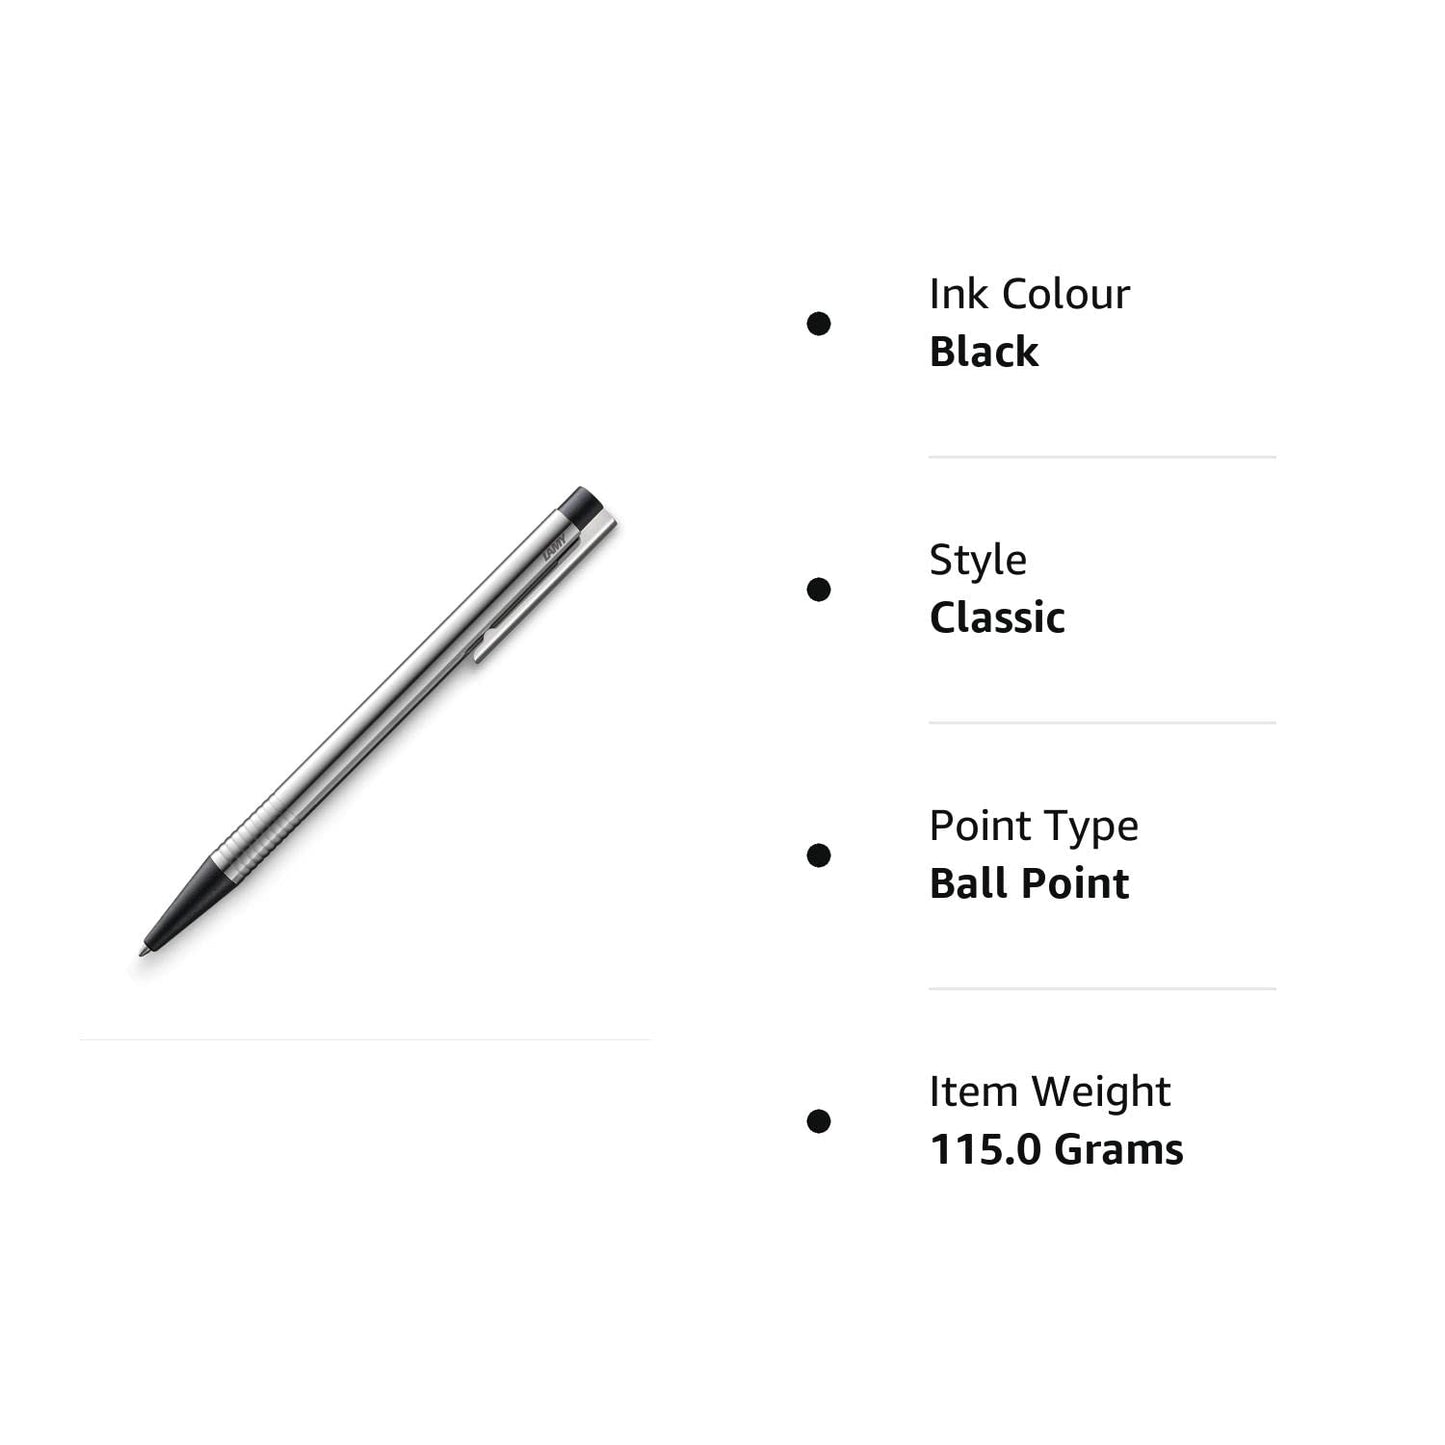 Lamy Logo Medium Tip Ball Point Pen | Matte Stainless Steel, Plastic Parts in Black | Smooth Refillable Pen with Lamy Giant Refill M 16 Black M